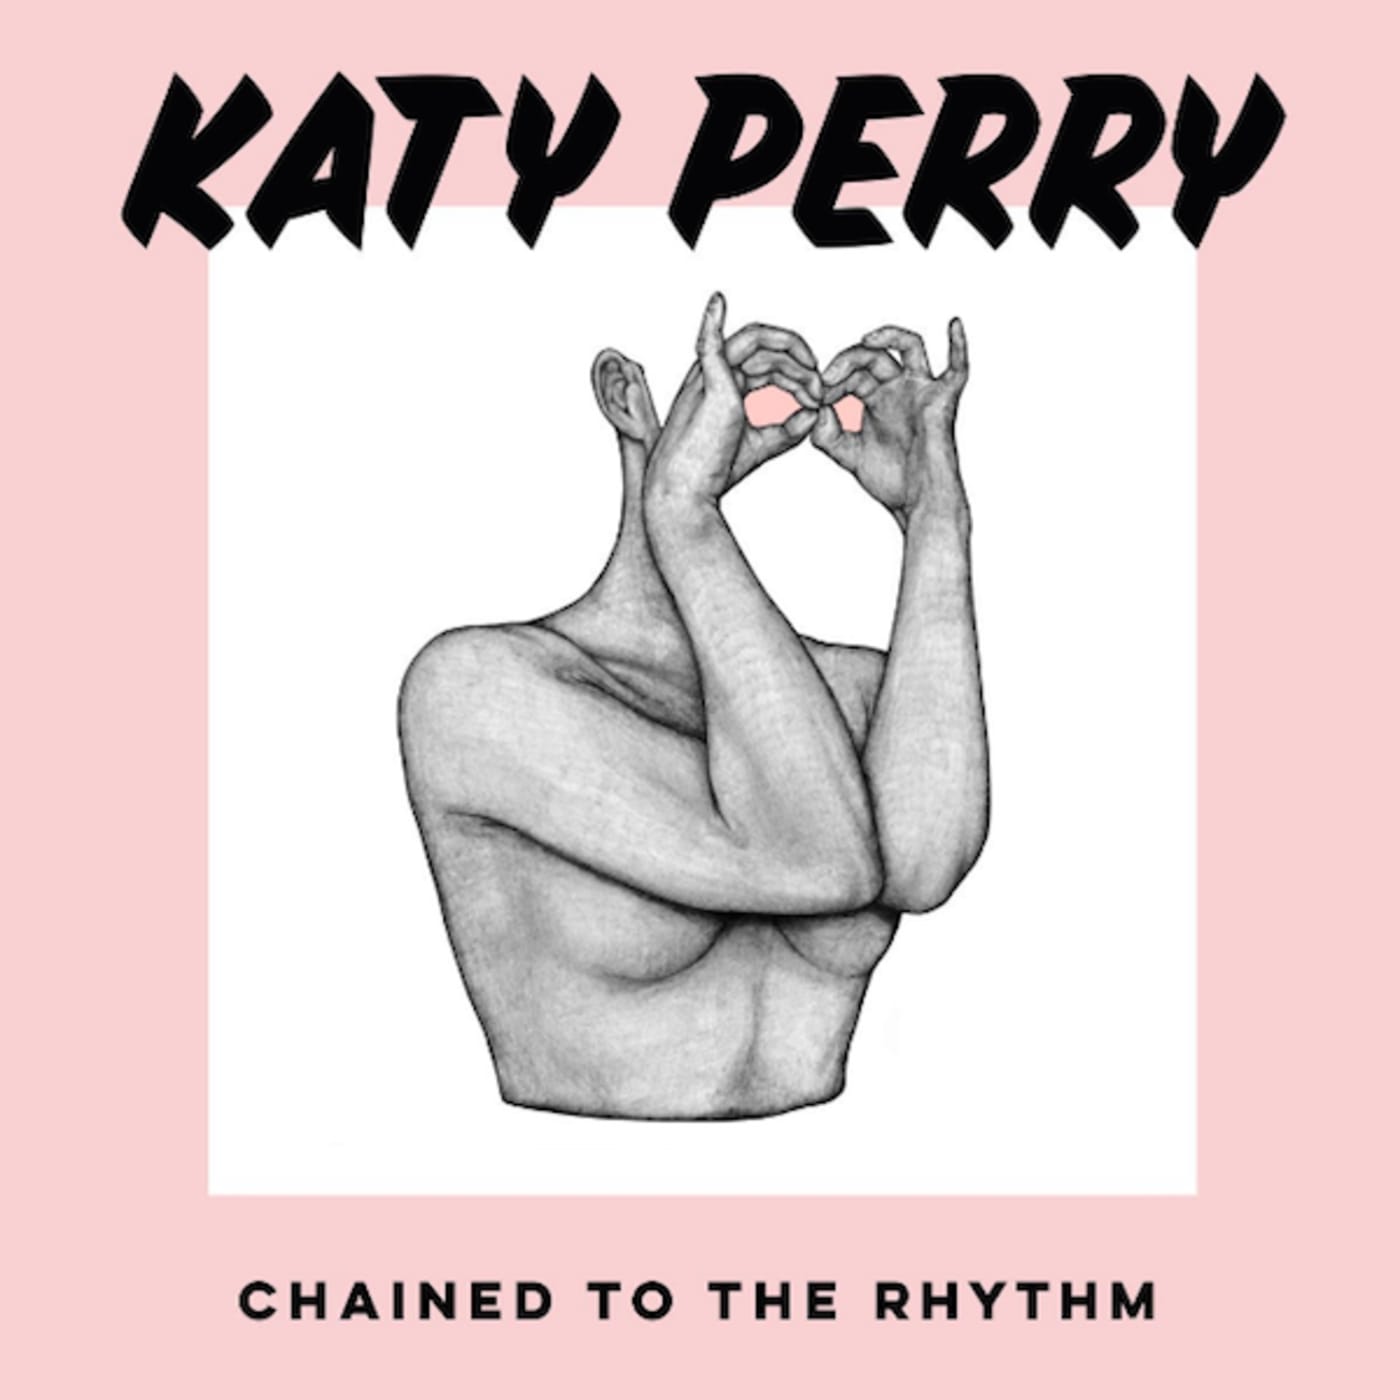 Katy Perry "Chained to the Rhythm" f/ Skip Marley.